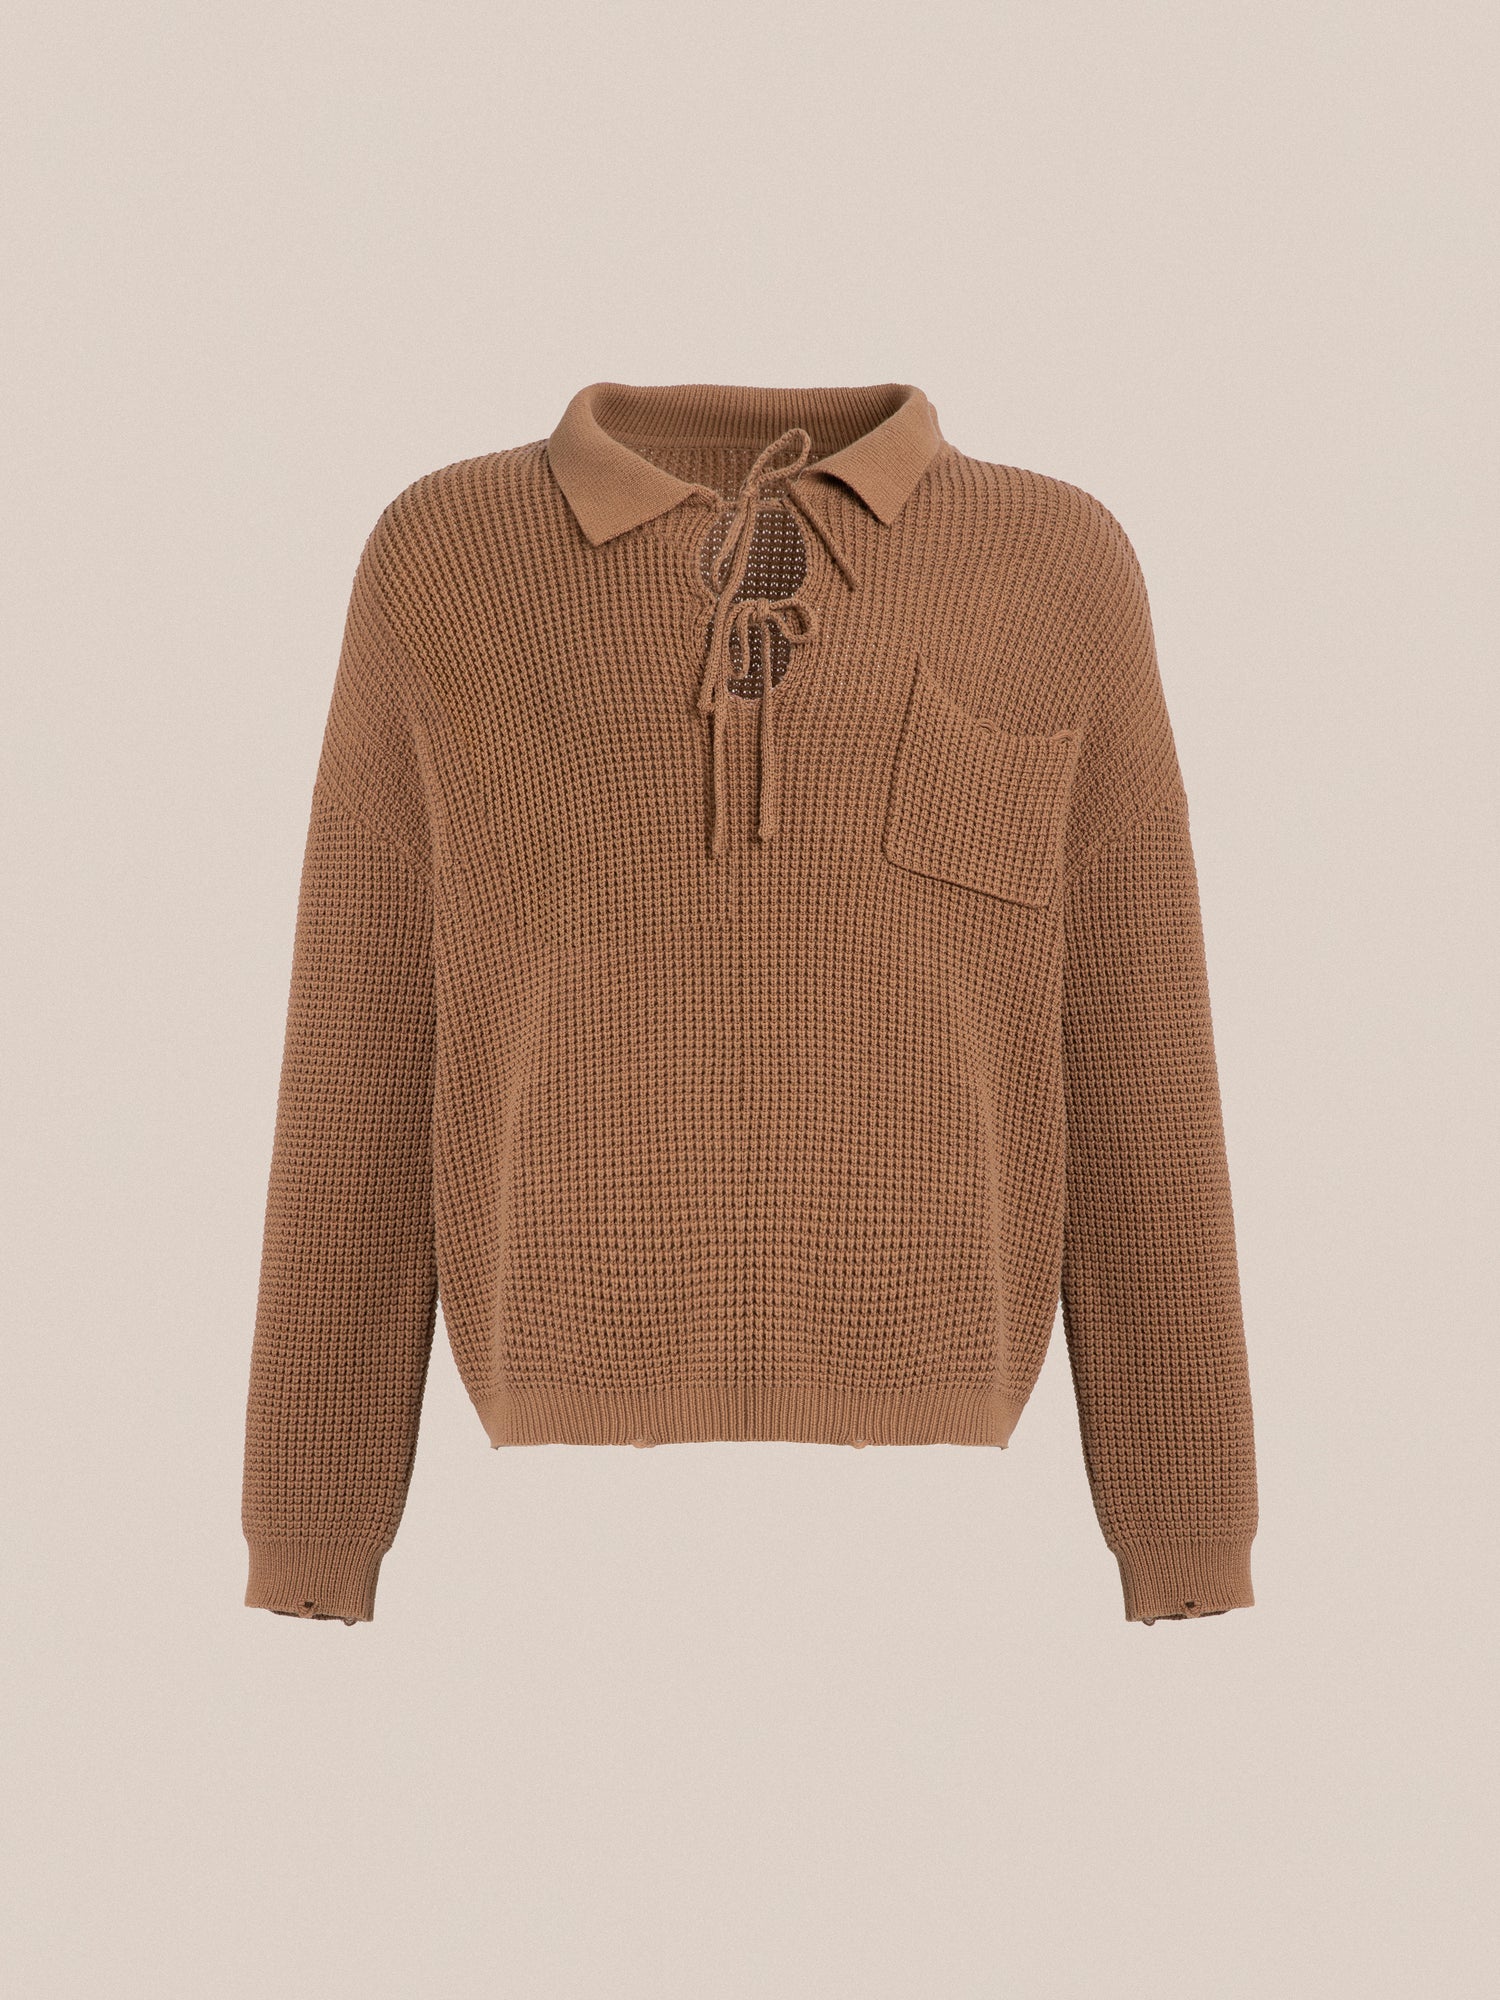 A cozy, brown Found tie-collar knit sweater with a lace-up neckline, perfect for autumn.